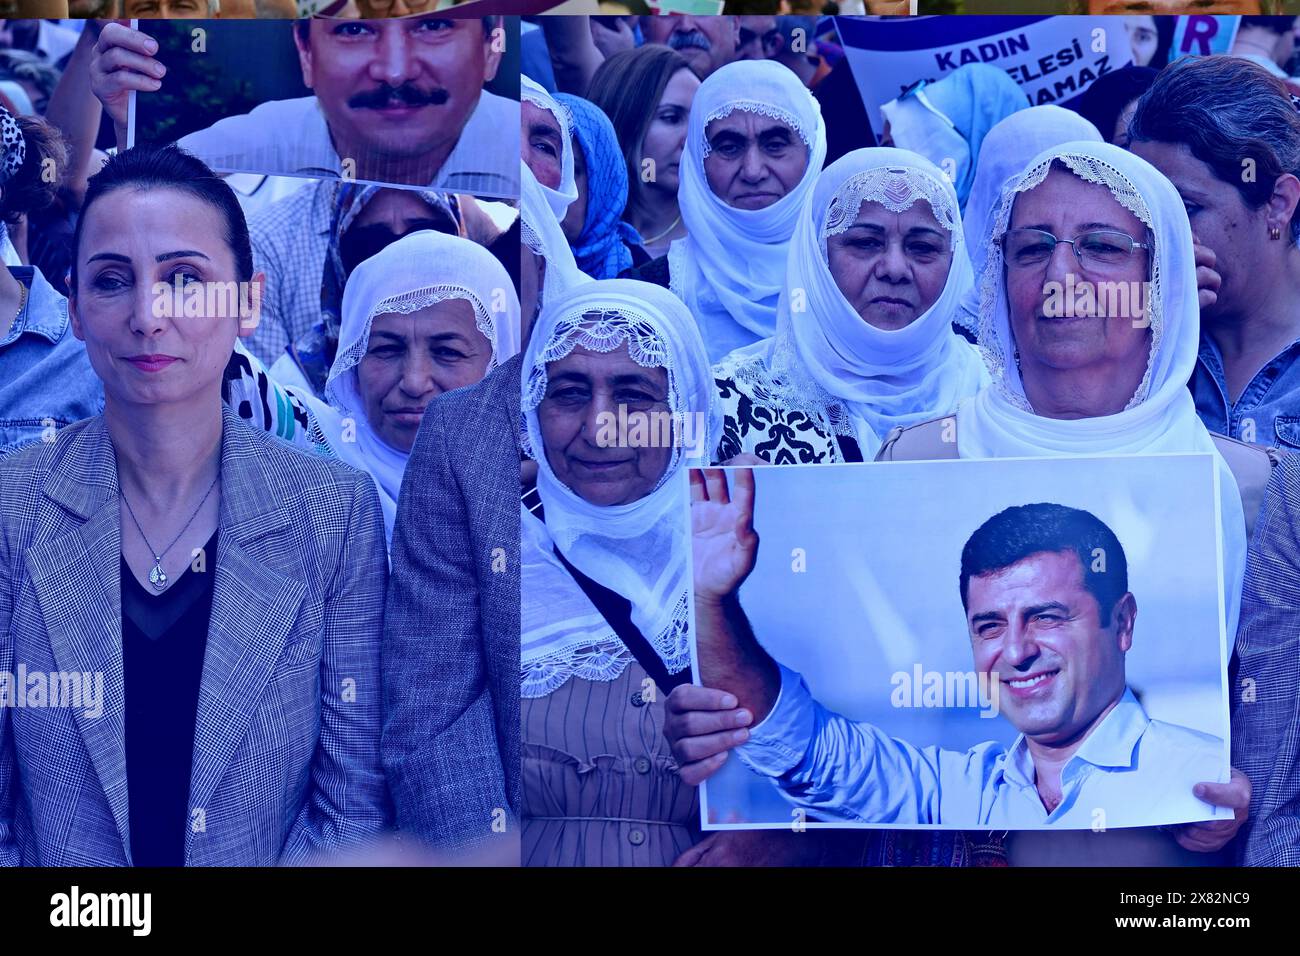 May 22, 2024, Diyarbakir, Turkey: People's Equality and Democracy Party (DEM Party) Co-Chairman Tulay Hatimogullari (M) and Democratic Regions Party Co-Chairman Keskin Bayindir (R2) are seen with a Kurdish Peace Mother during the demonstration. The long prison sentences given to some Kurdish politicians in Turkey were protested with a march and press statement organized by the People's Equality and Democracy Party (DEM Party), Democratic Regions Party (DBP) and the Free Women's Movement (TJA-Tevgera JinÃªn Azad) organization in Diyarbakir. Many police officers were seen during the protest, but Stock Photo